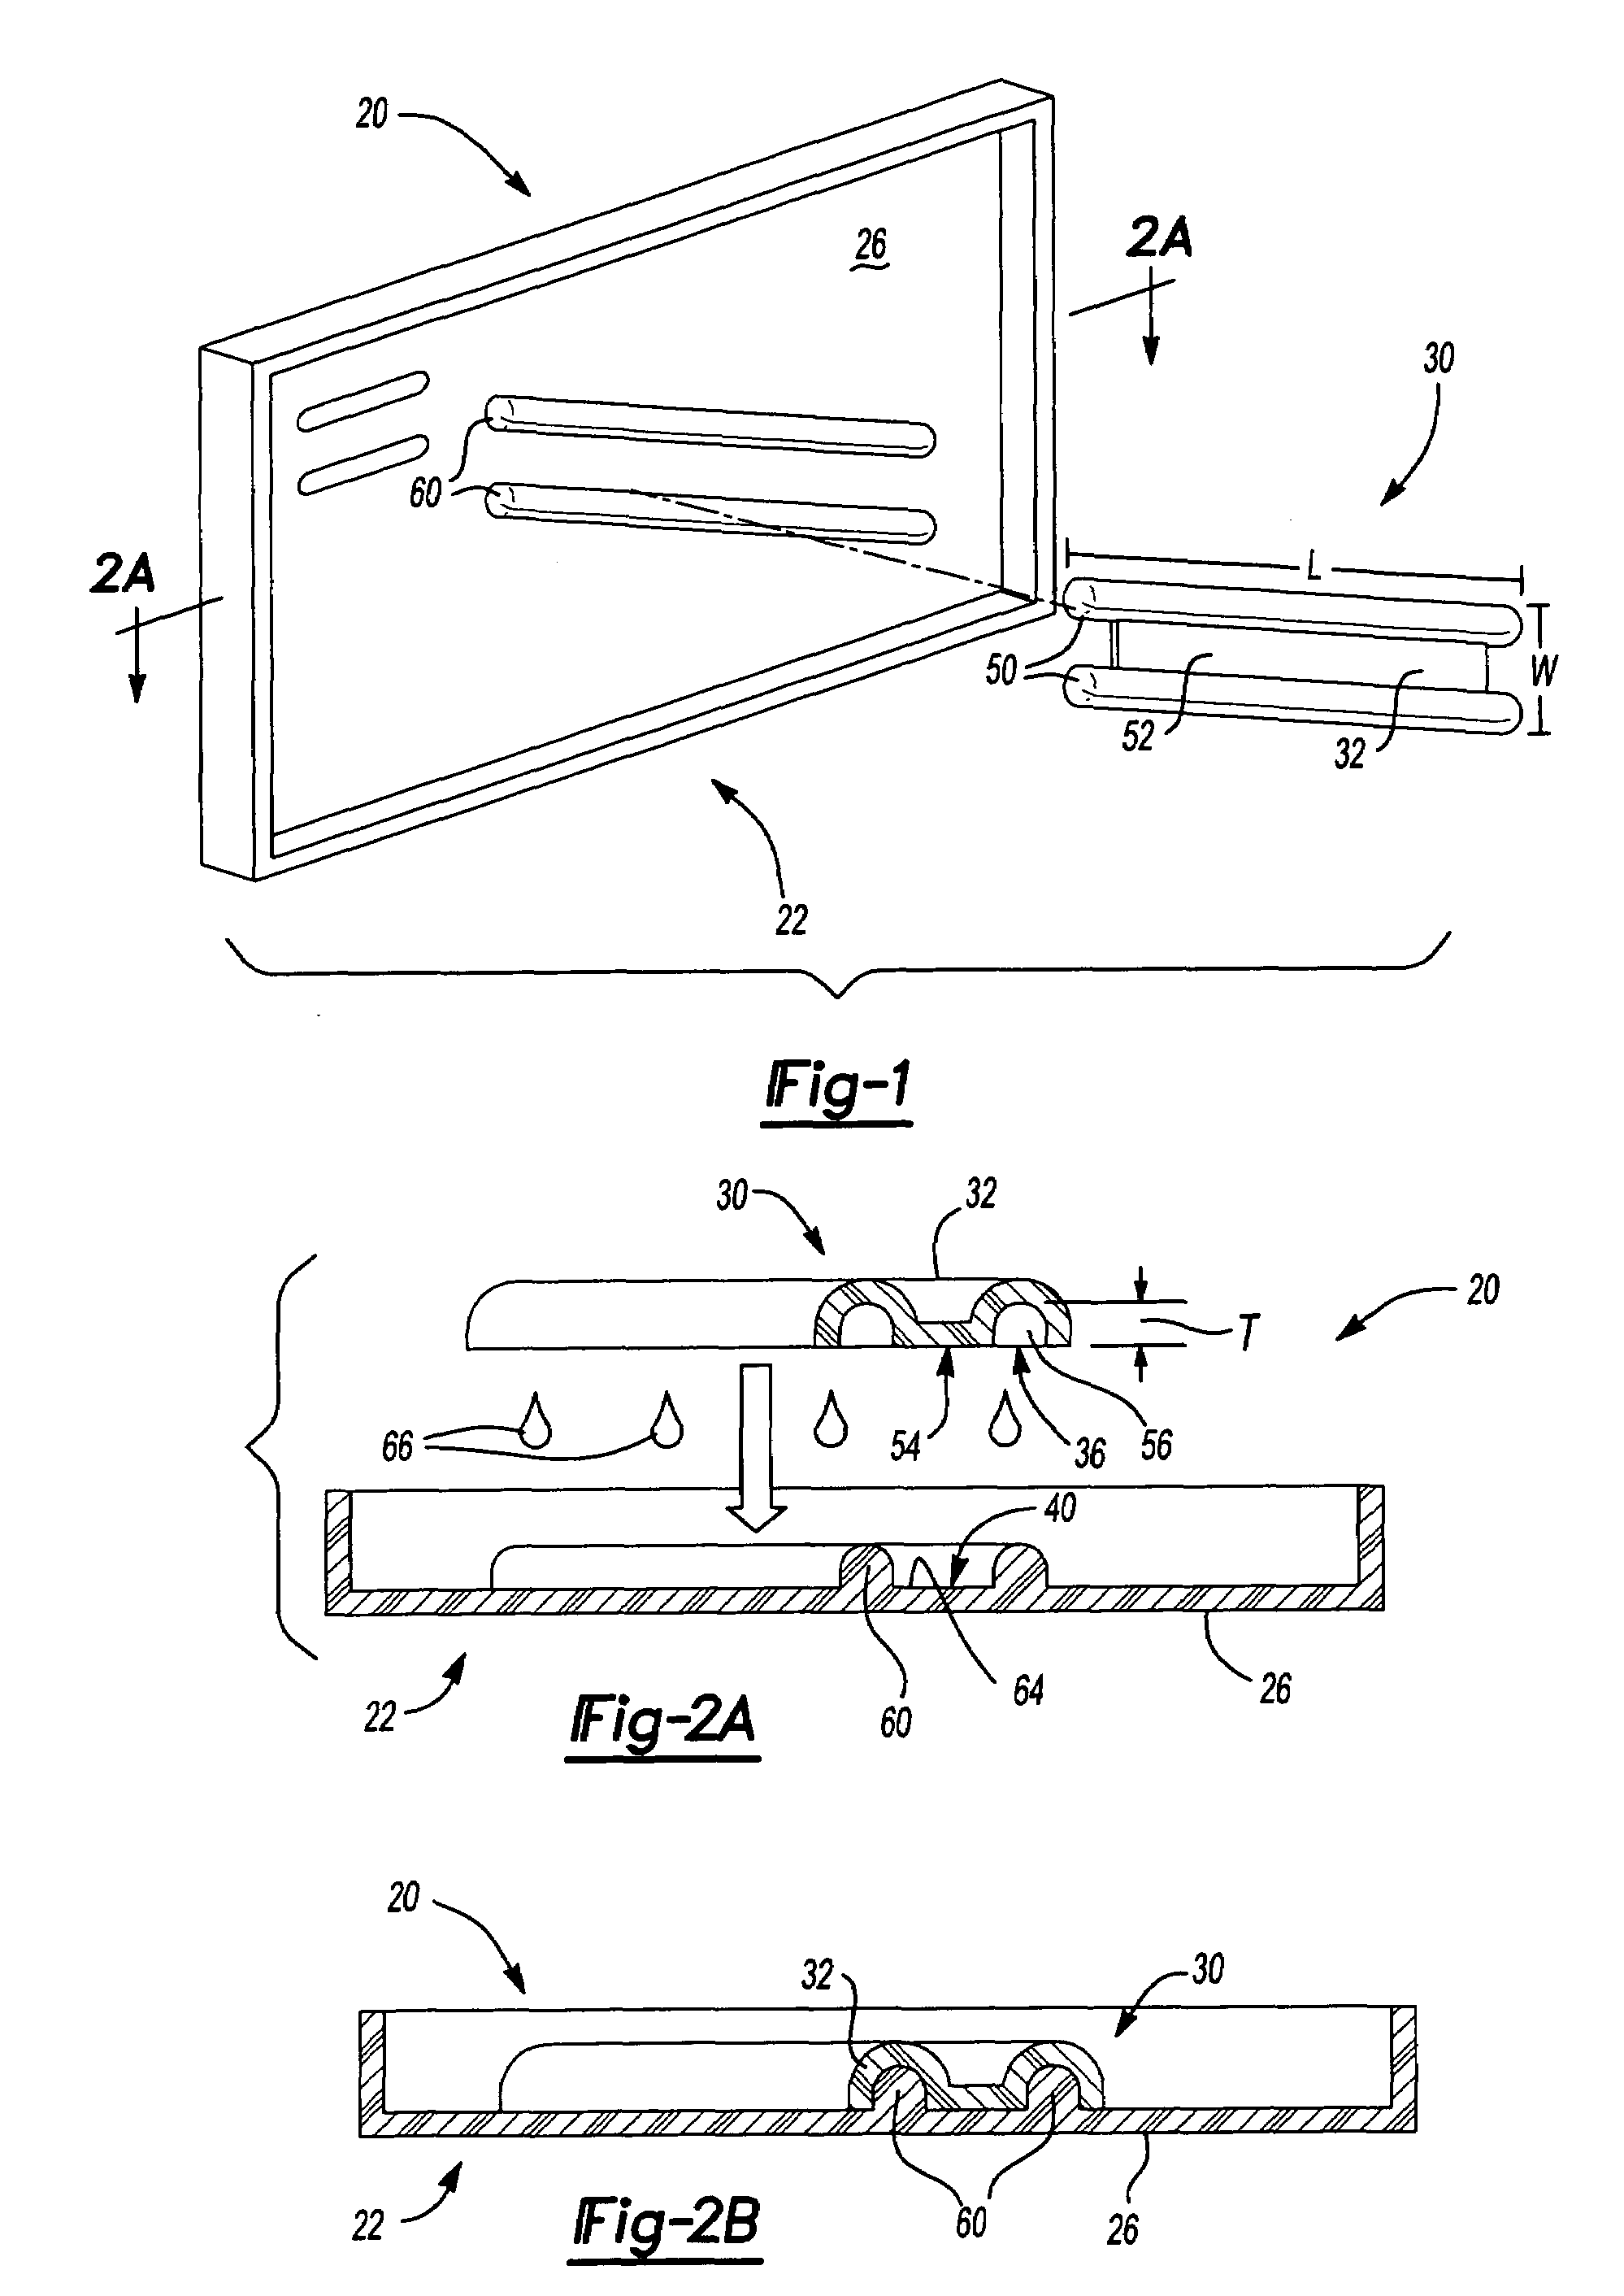 Method of forming a seating system